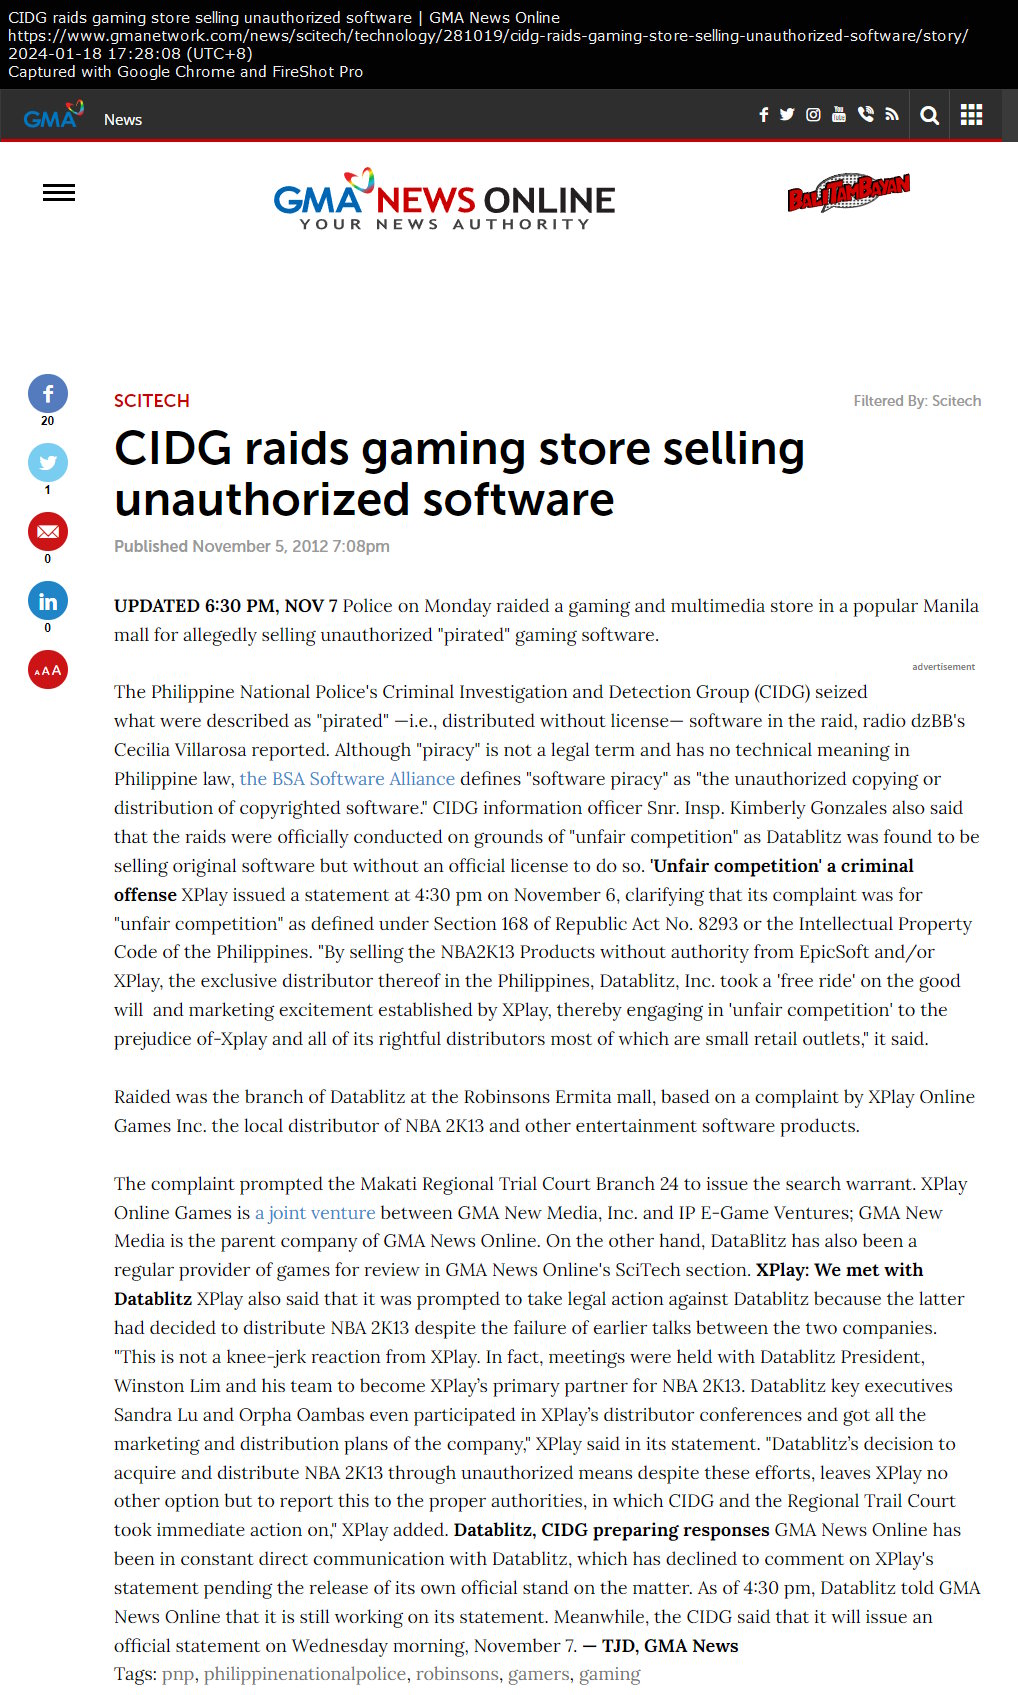 CIDG raids gaming store selling unauthorized software (updated)